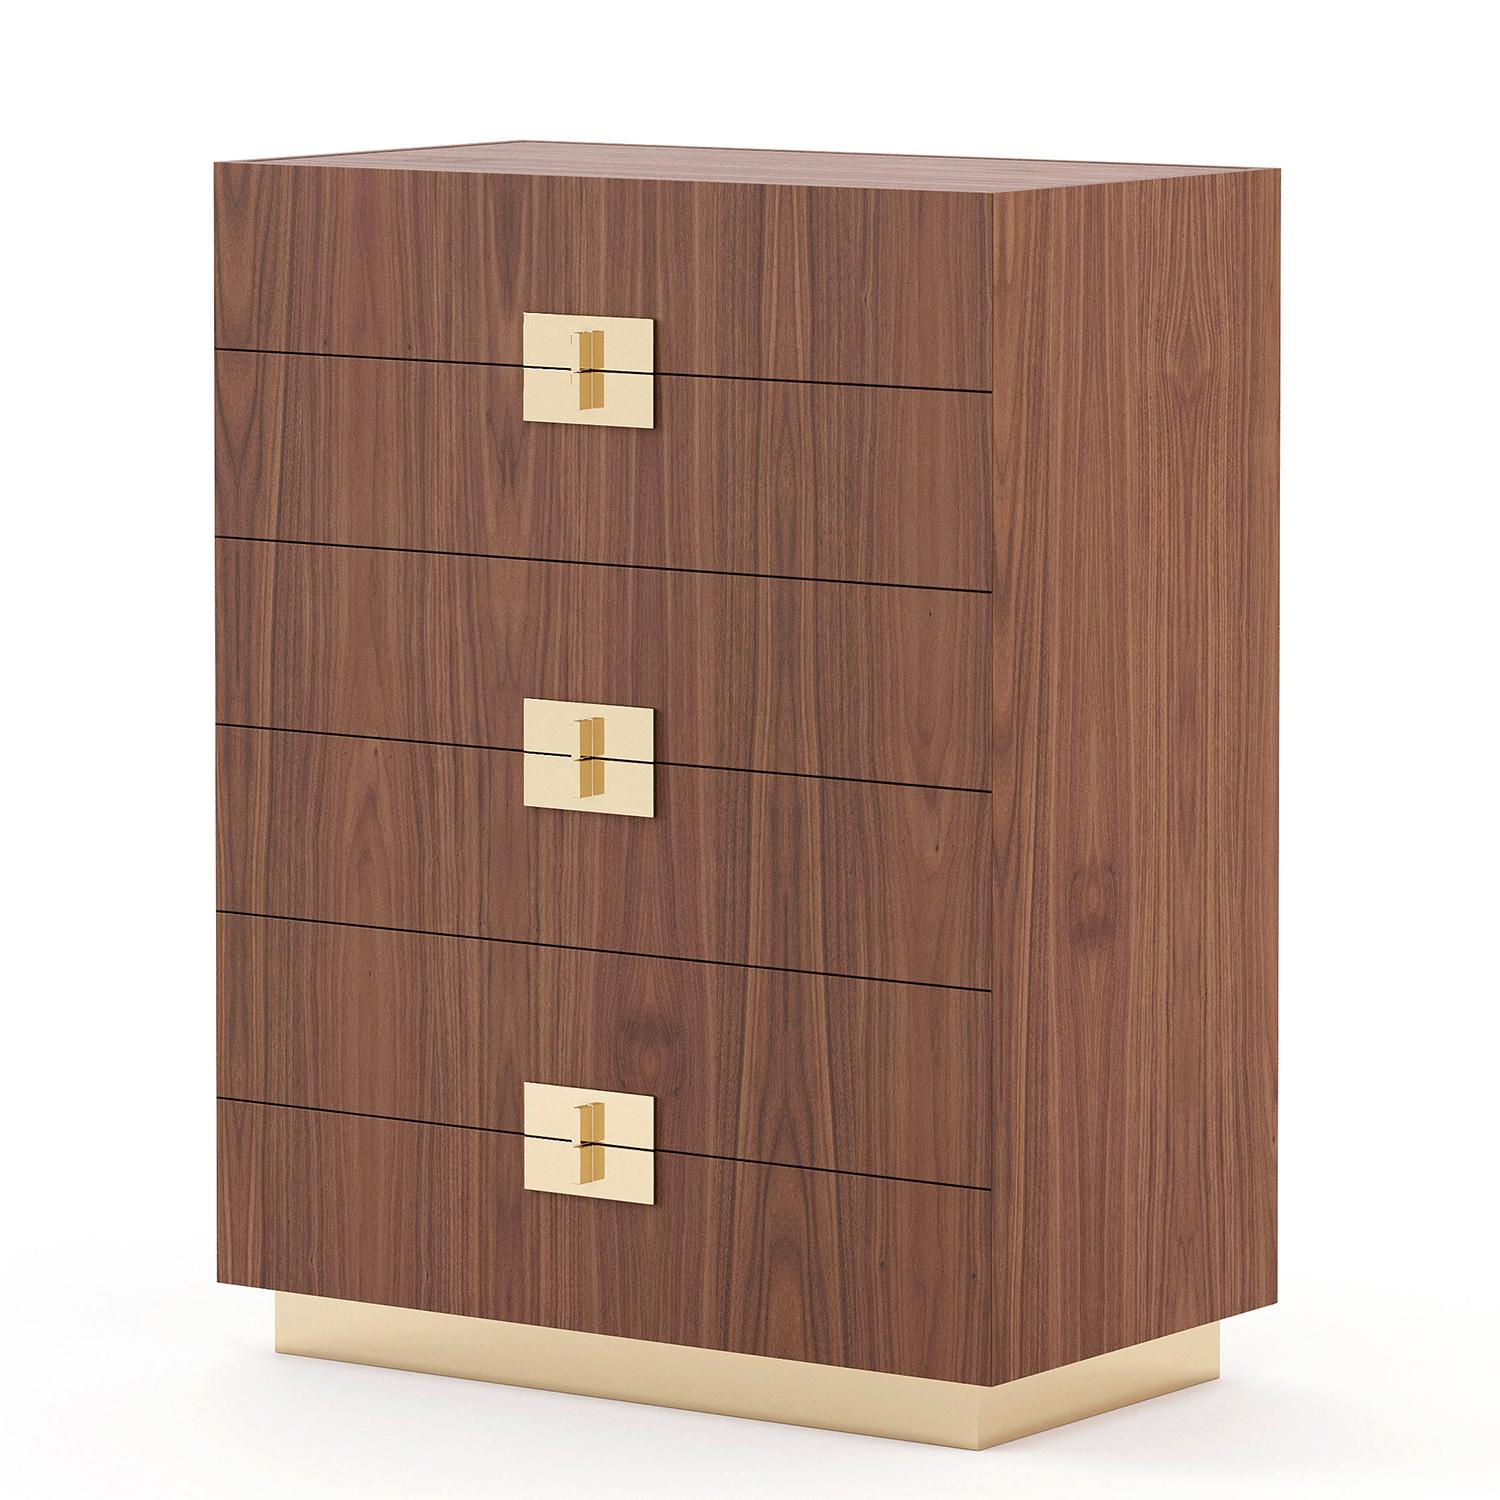 Chest of drawers Lenny High with structure in veneered walnut wood,
with white marble top. Chest with 6 drawers, with easy glide system. 
Base and handles in polished stainless steel in gold finish.
Also available with other wood and metal